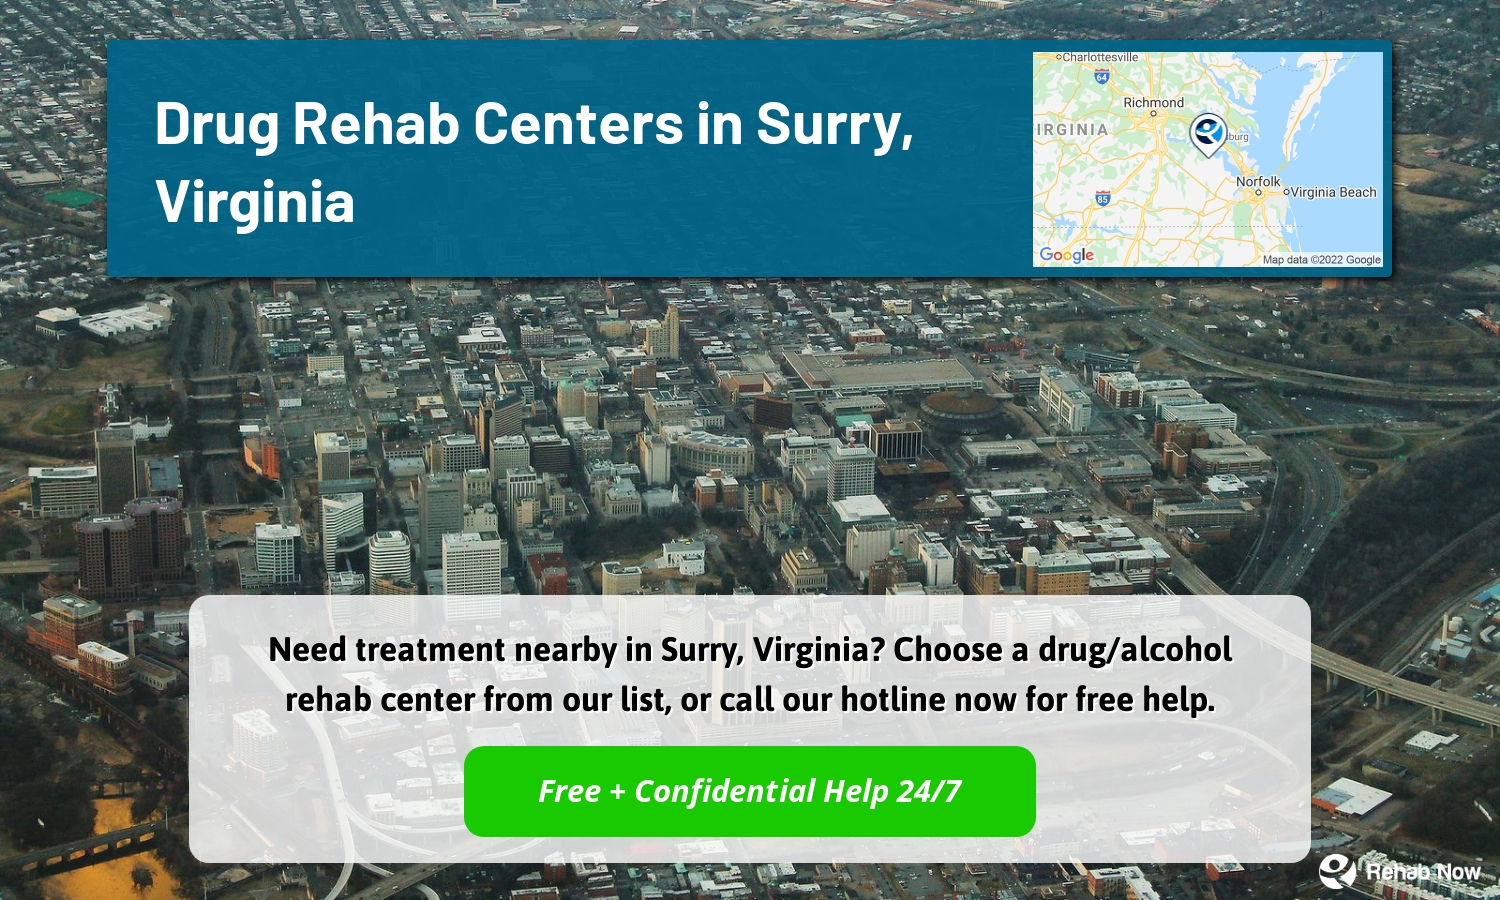 Need treatment nearby in Surry, Virginia? Choose a drug/alcohol rehab center from our list, or call our hotline now for free help.